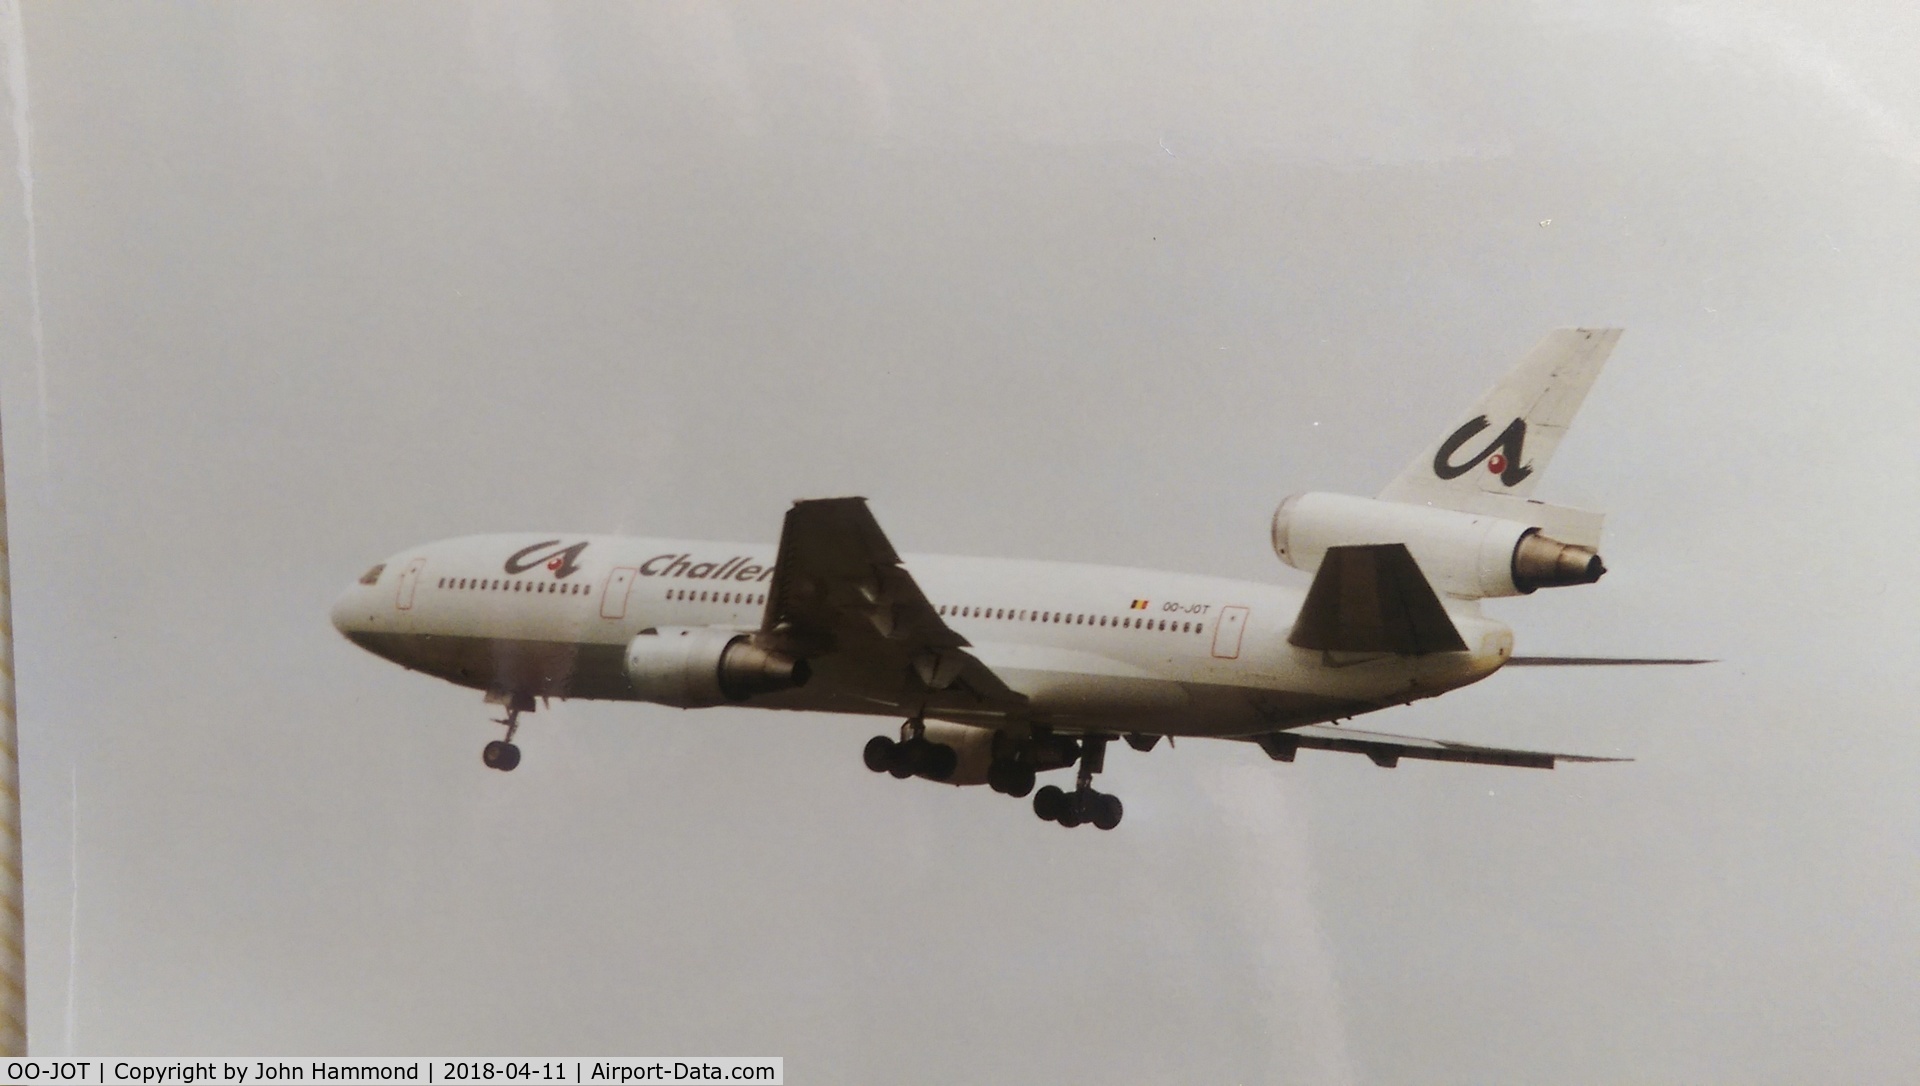 OO-JOT, 1973 McDonnell Douglas DC-10-30 C/N 46850, Manchester airport UK. Early/mid 1990's